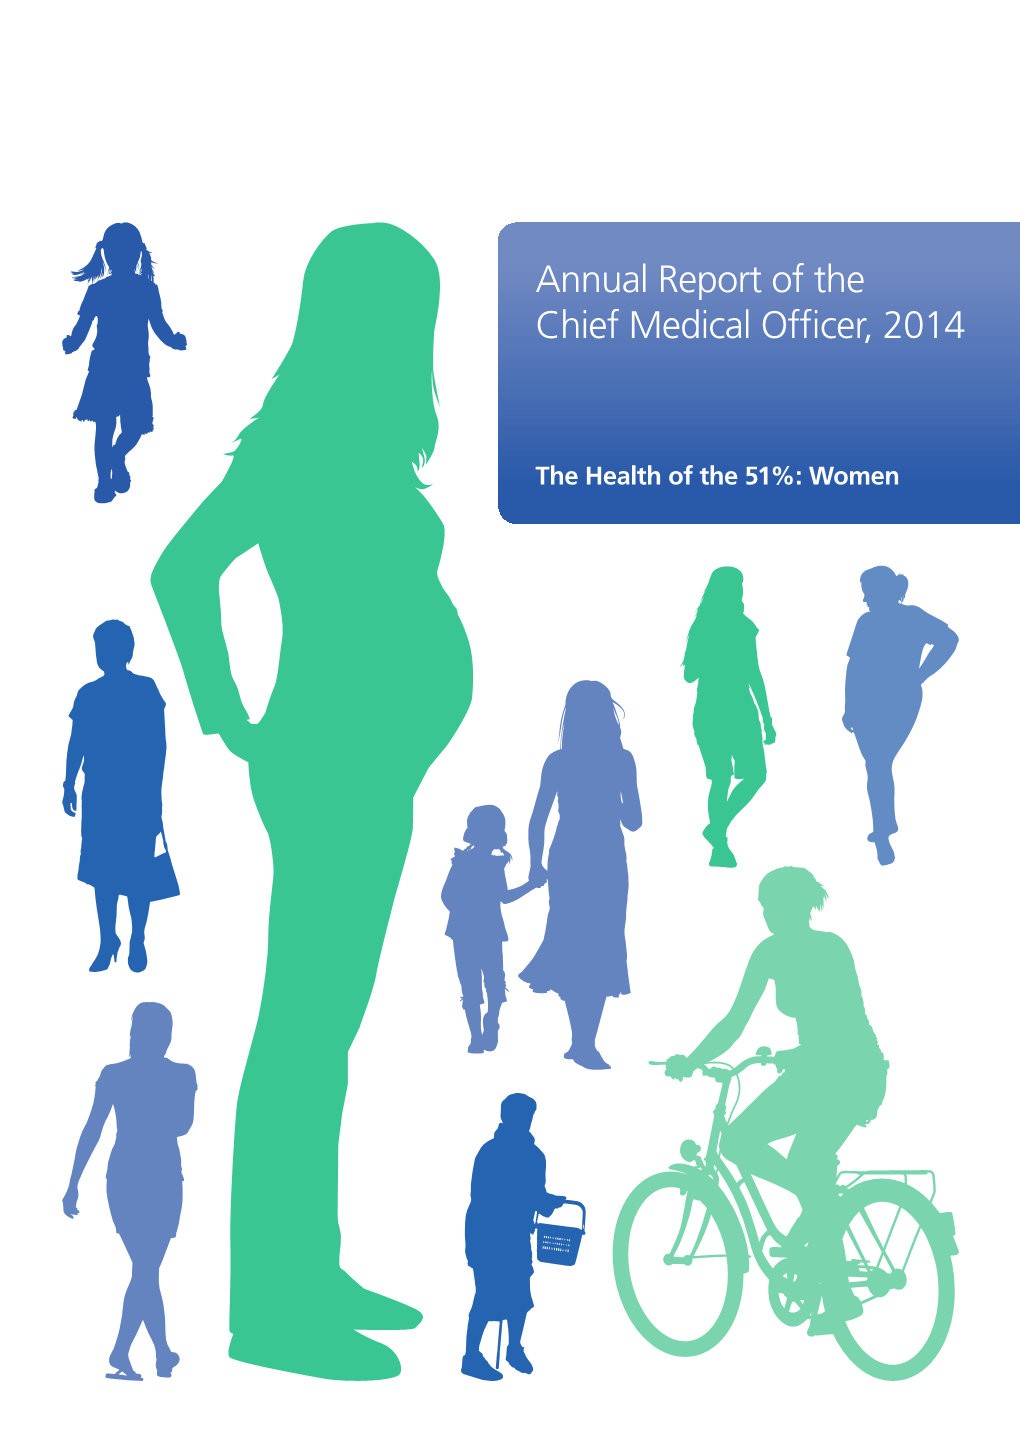 Annual Report of the Chief Medical Officer, 2014